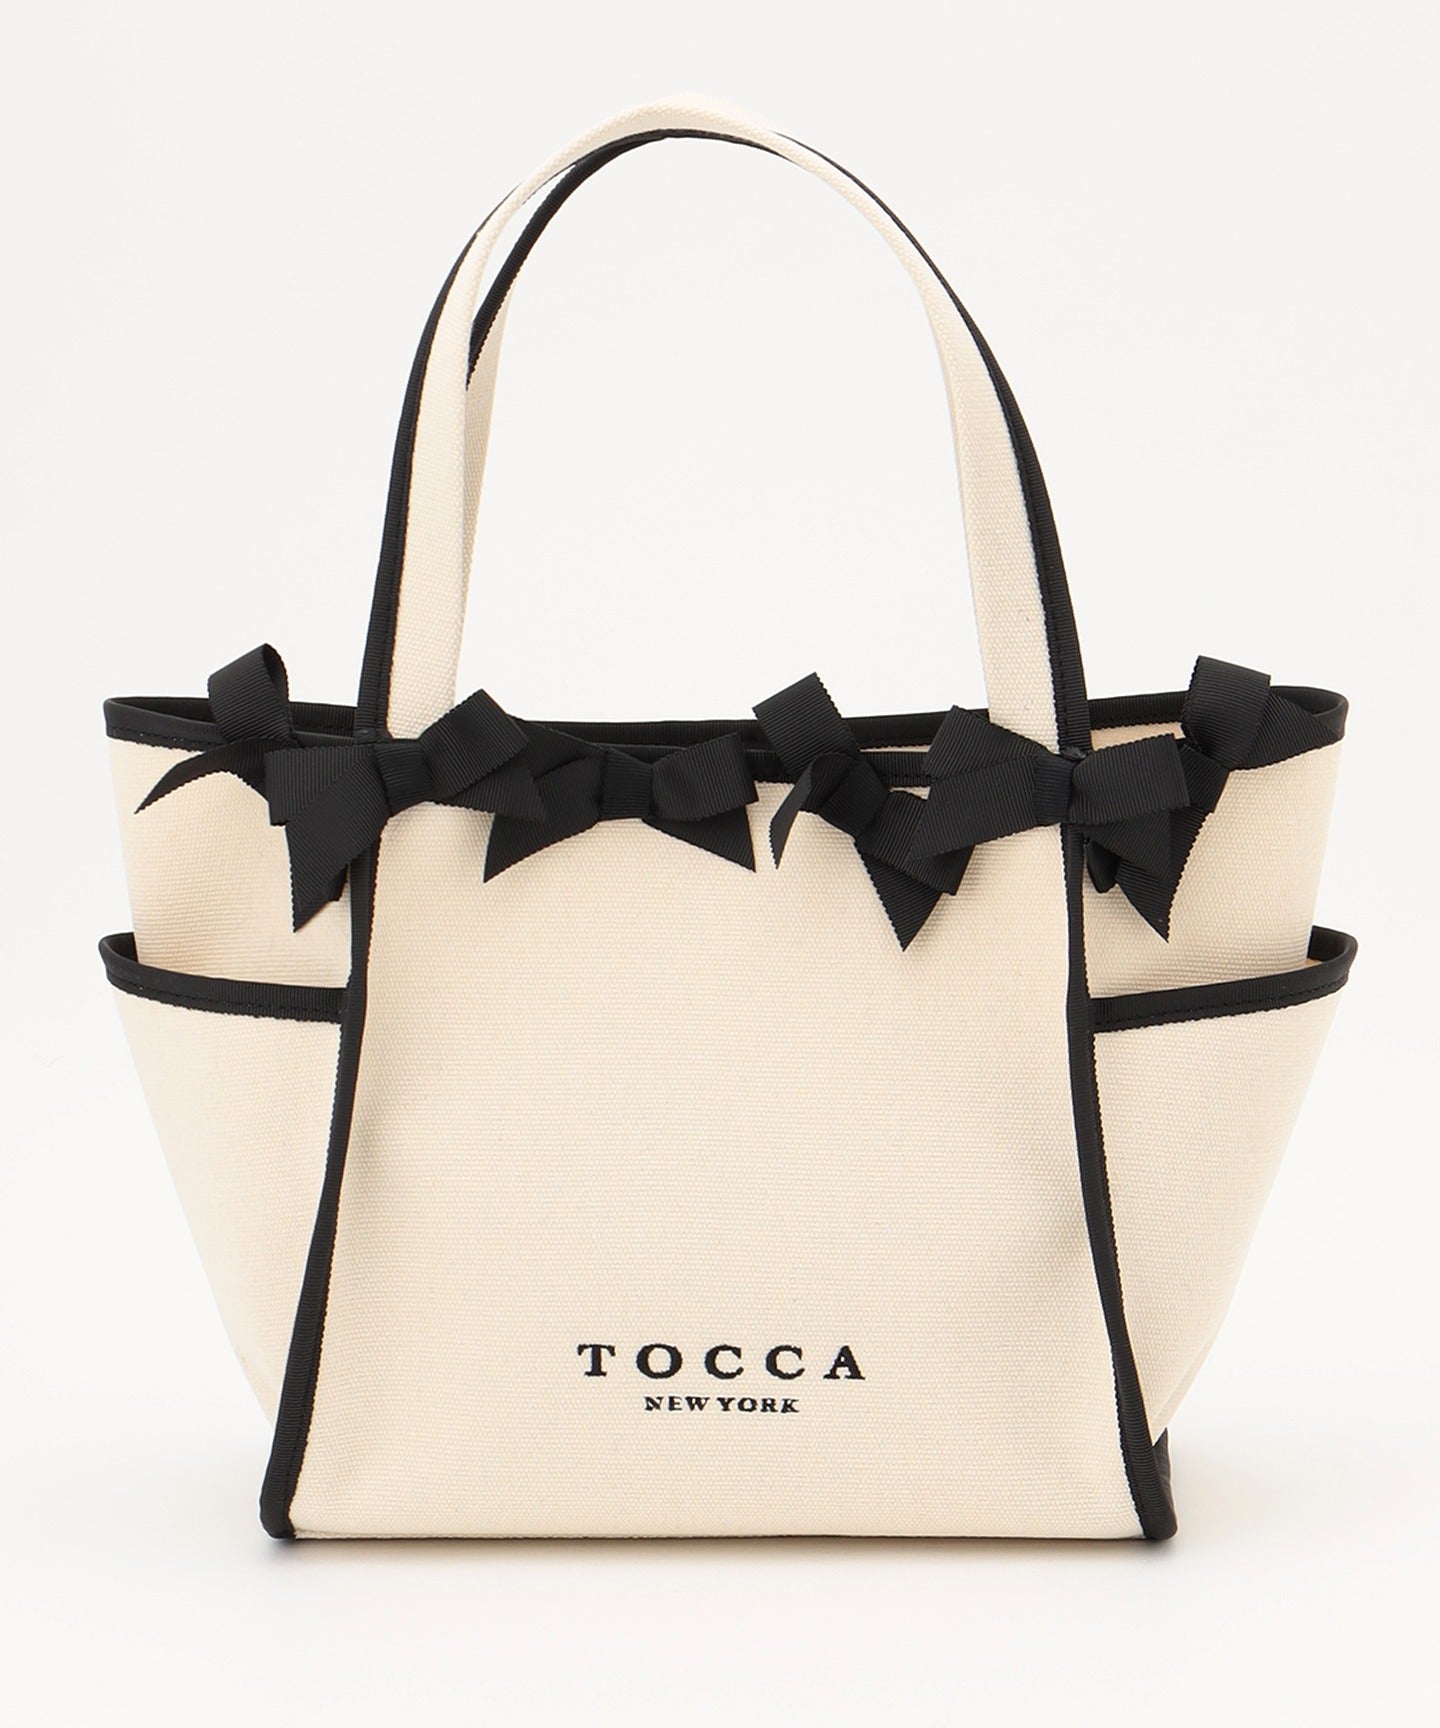 ♦︎未使用♦︎ TOCCA CANVAS TOTE トートバッグ - バッグ